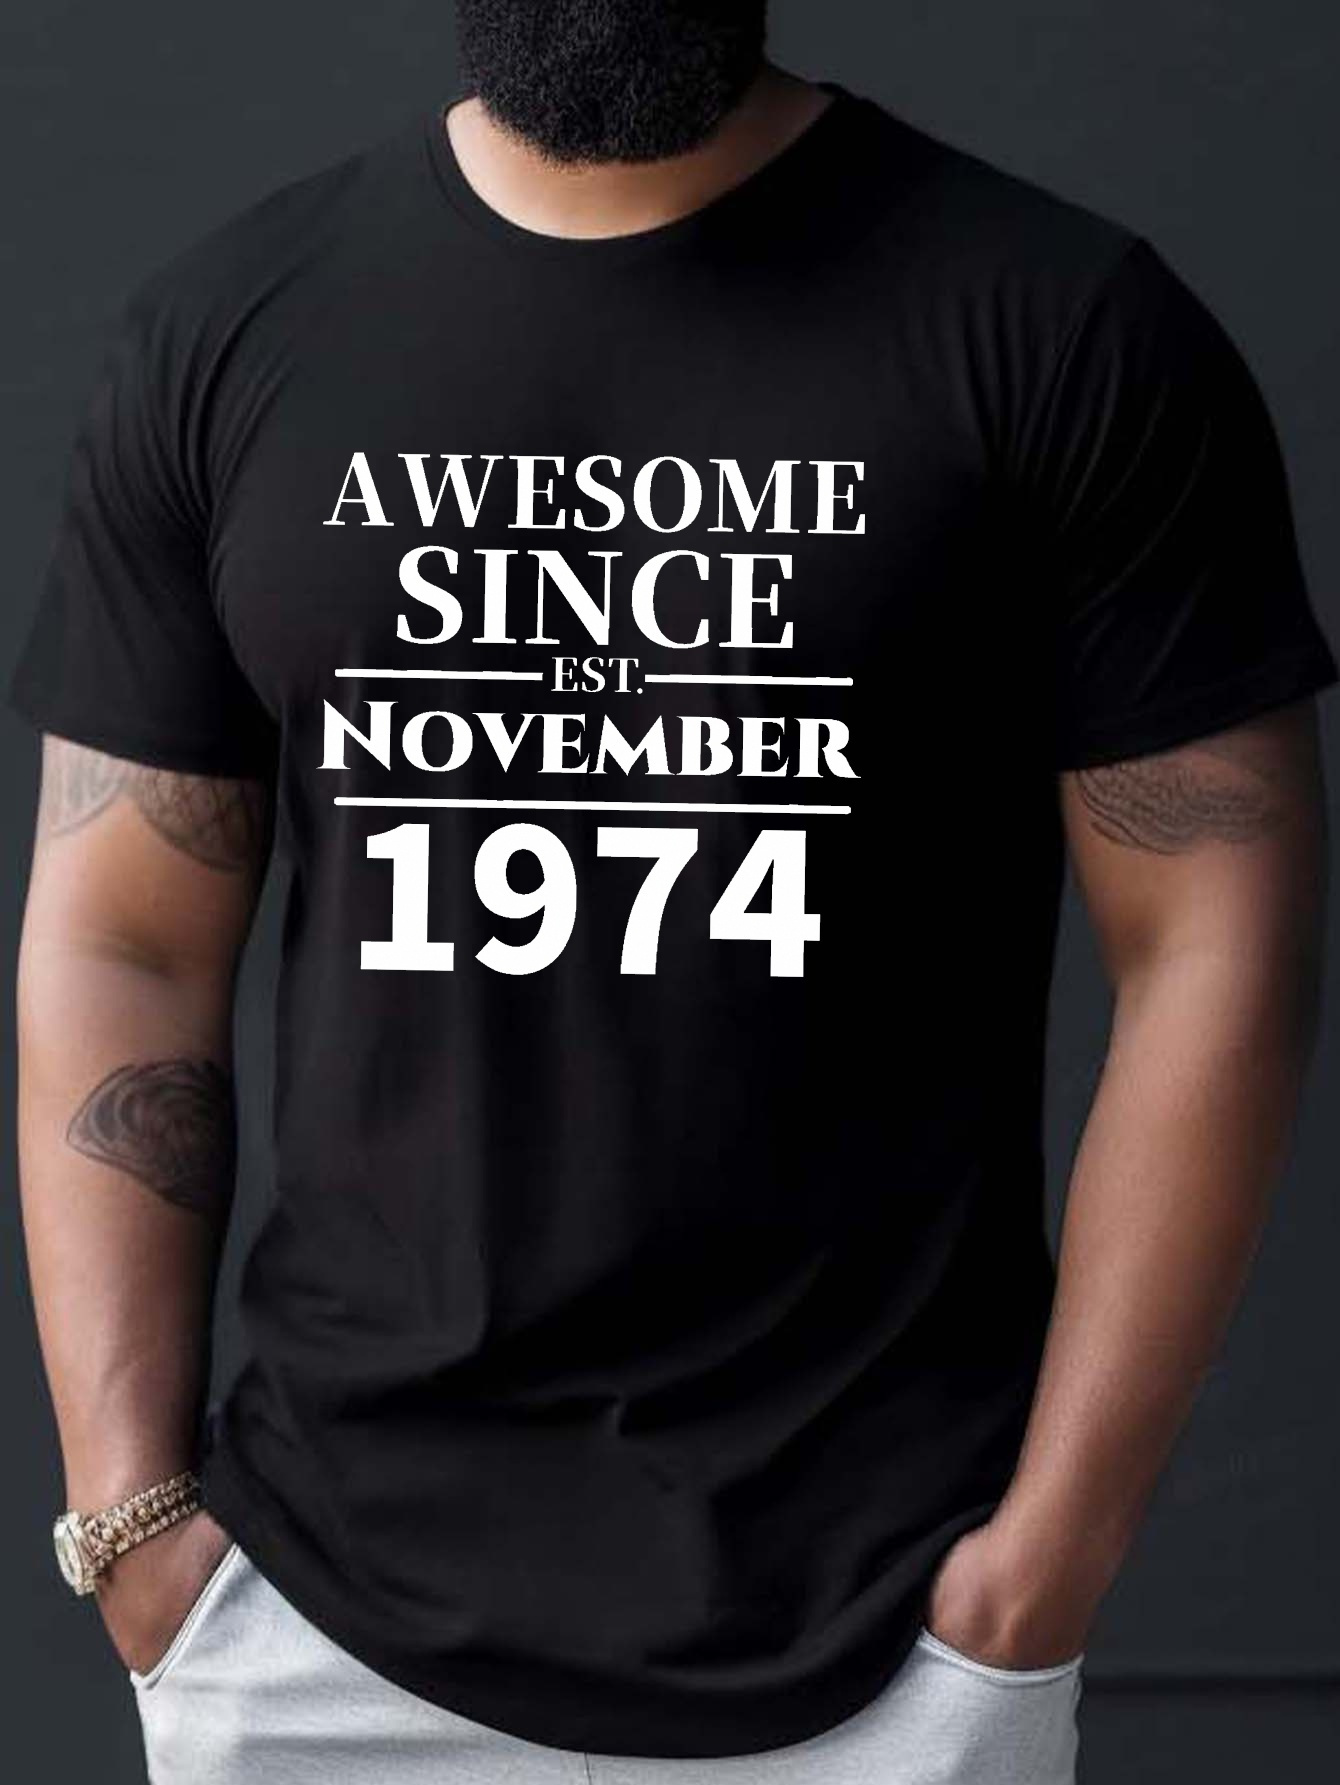 AWESOME SINCE NOVEMBER 1974 Print Tee Shirt, Tees For Men, Casual Short Sleeve T-shirt For Summer